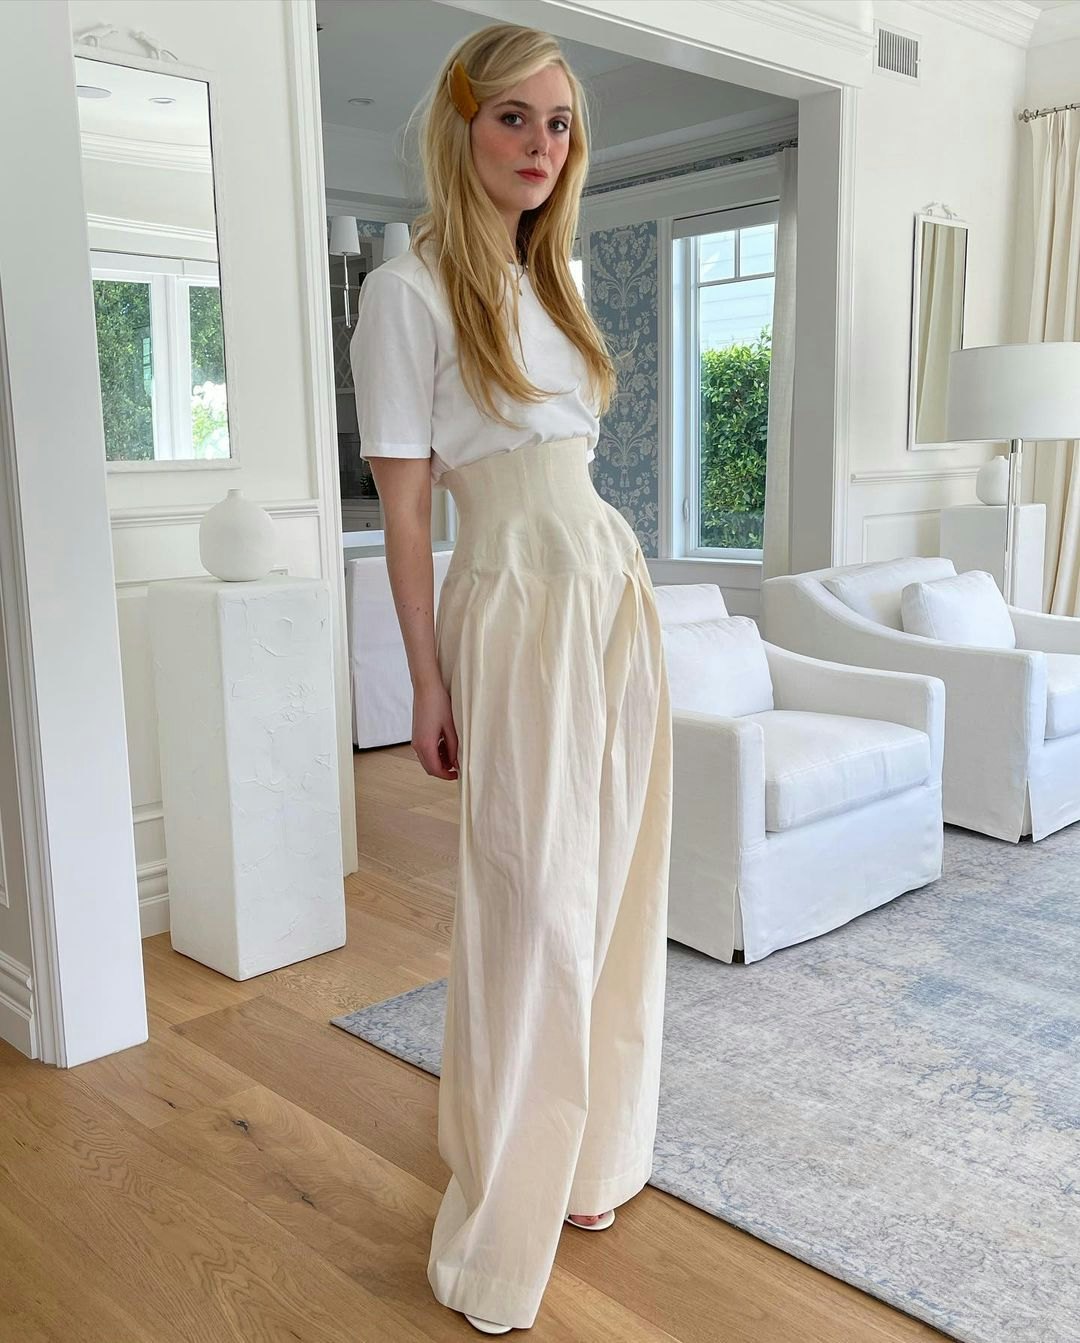 Elle Fanning Pairs Some Campy Heels with a Chic Outfit From The Row